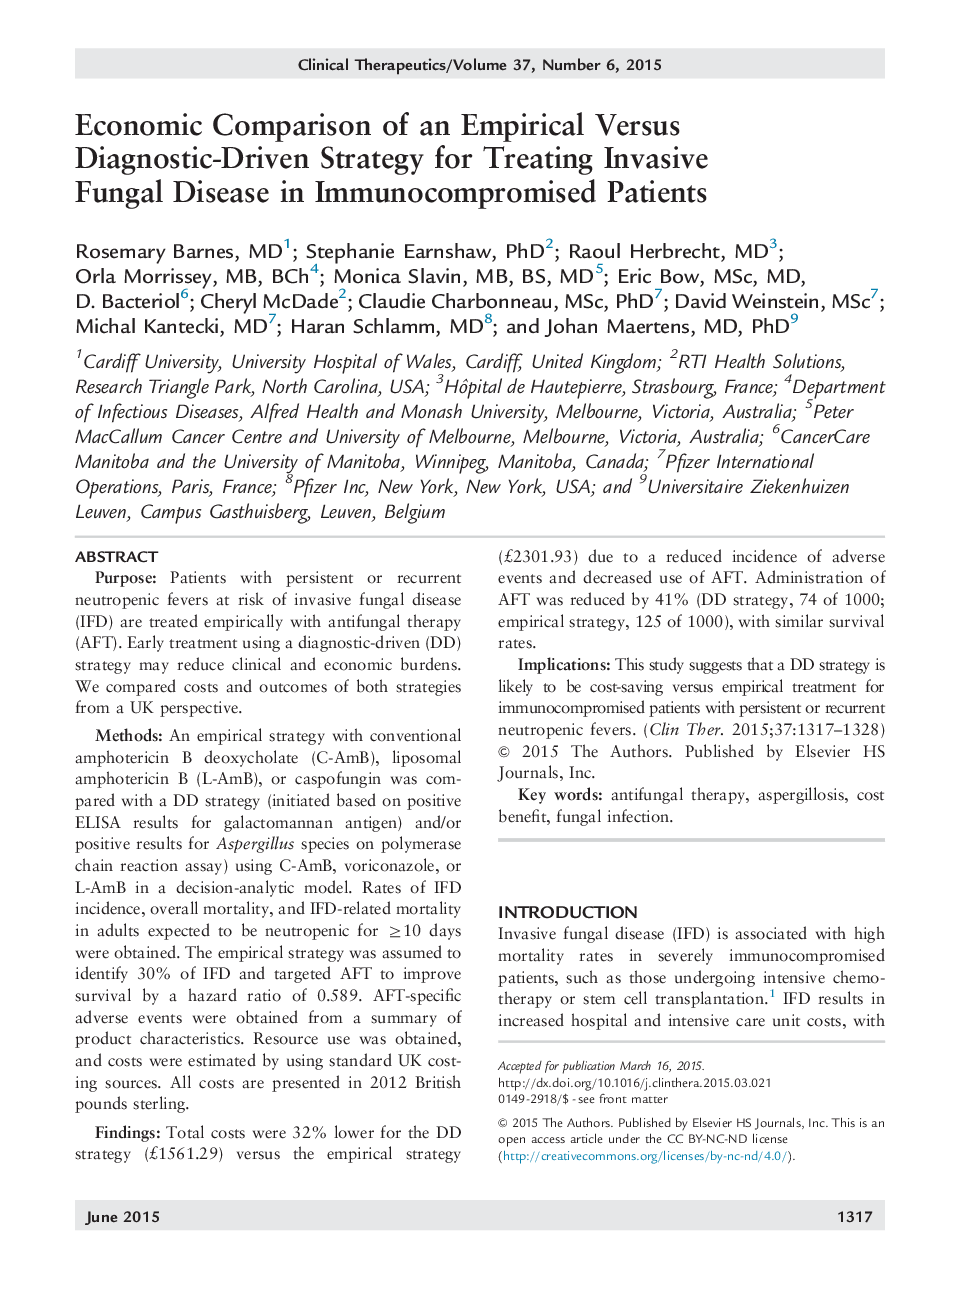 Economic Comparison of an Empirical Versus Diagnostic-Driven Strategy for Treating Invasive Fungal Disease in Immunocompromised Patients